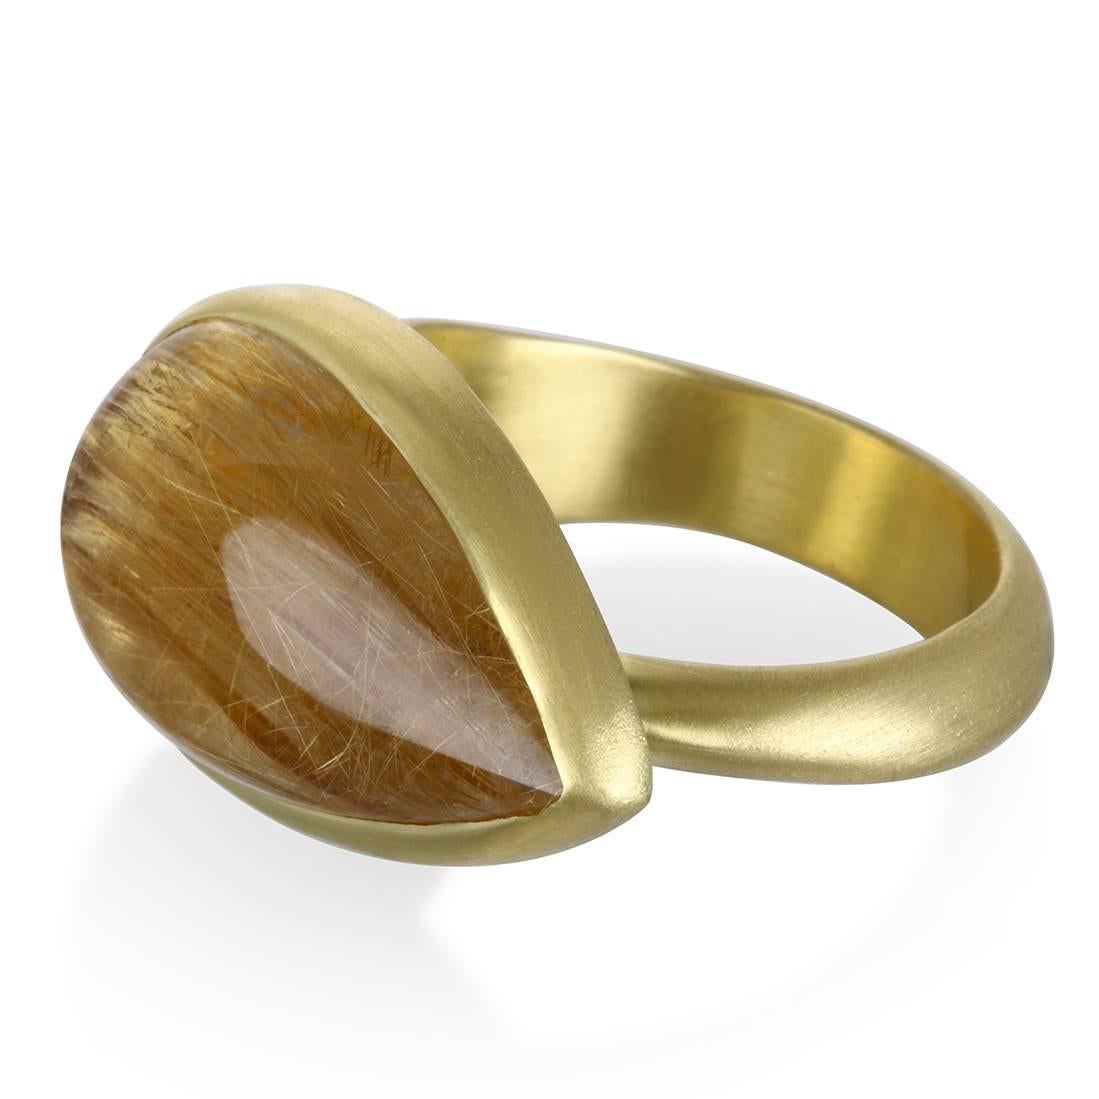 Rutilated Quartz is one of the few gemstones prized for its inclusions. The golden Rutile needles radiate a warm glow from within making this ring sensational in every way.  Boldly chic and sophisticated, the ring is a true one-of-a-kind statement